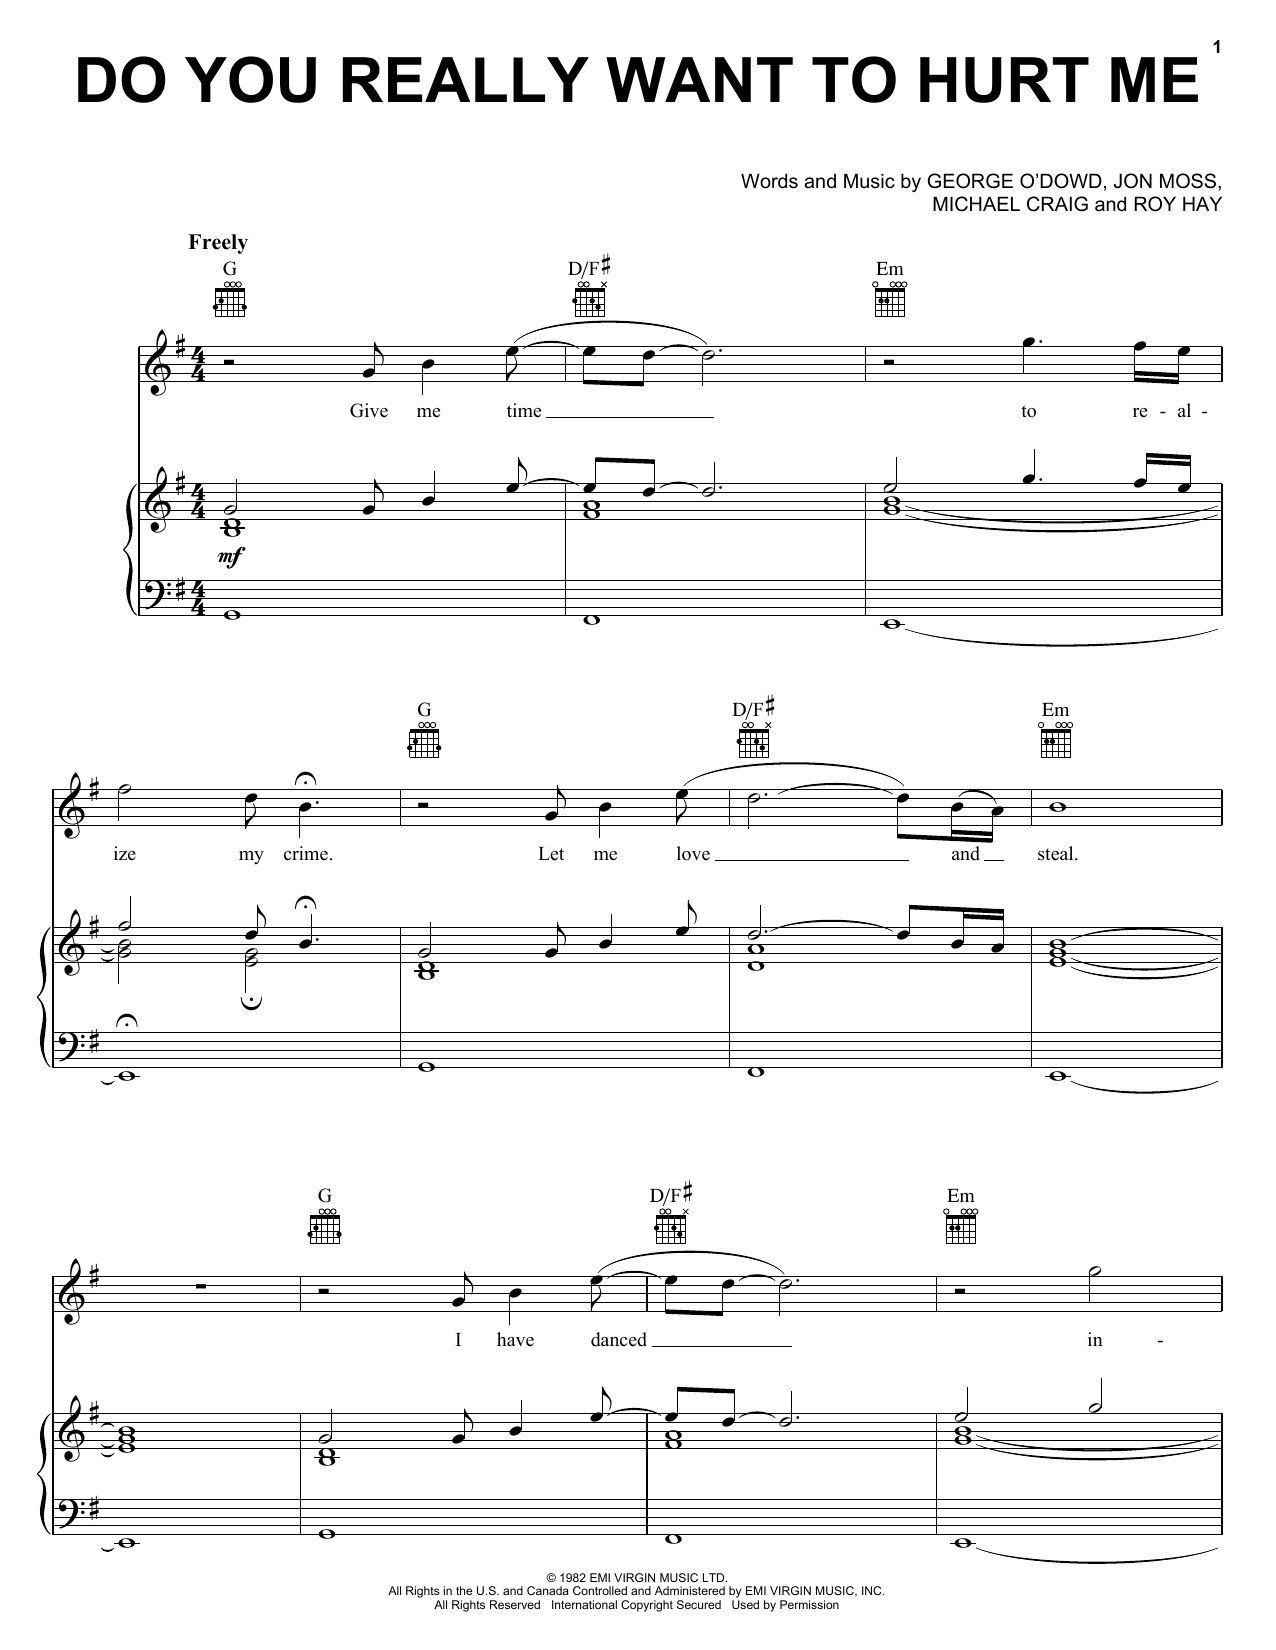 Culture Club Do You Really Want To Hurt Me sheet music notes and chords. Download Printable PDF.